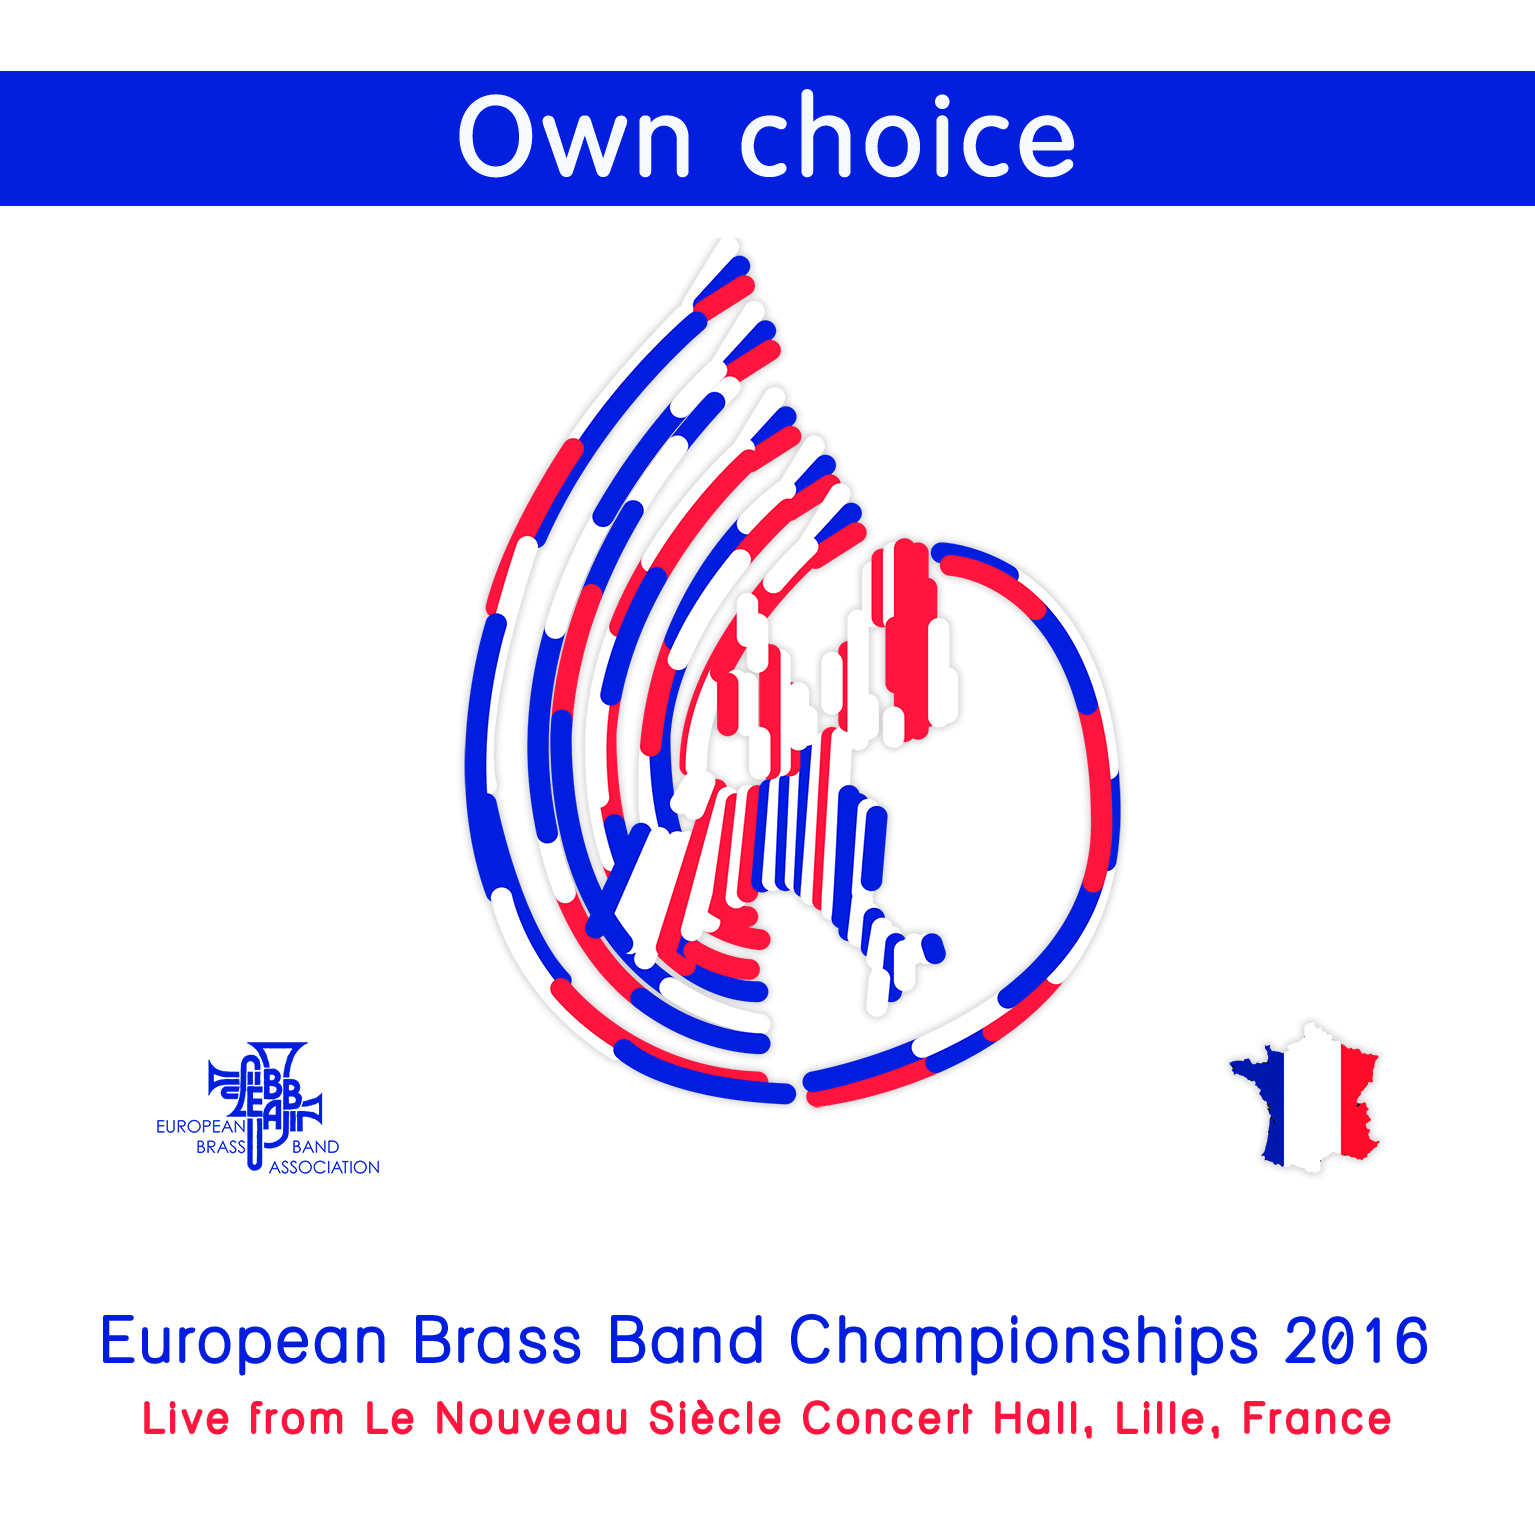 European Brass Band Championships 2016 - Own choice - Download